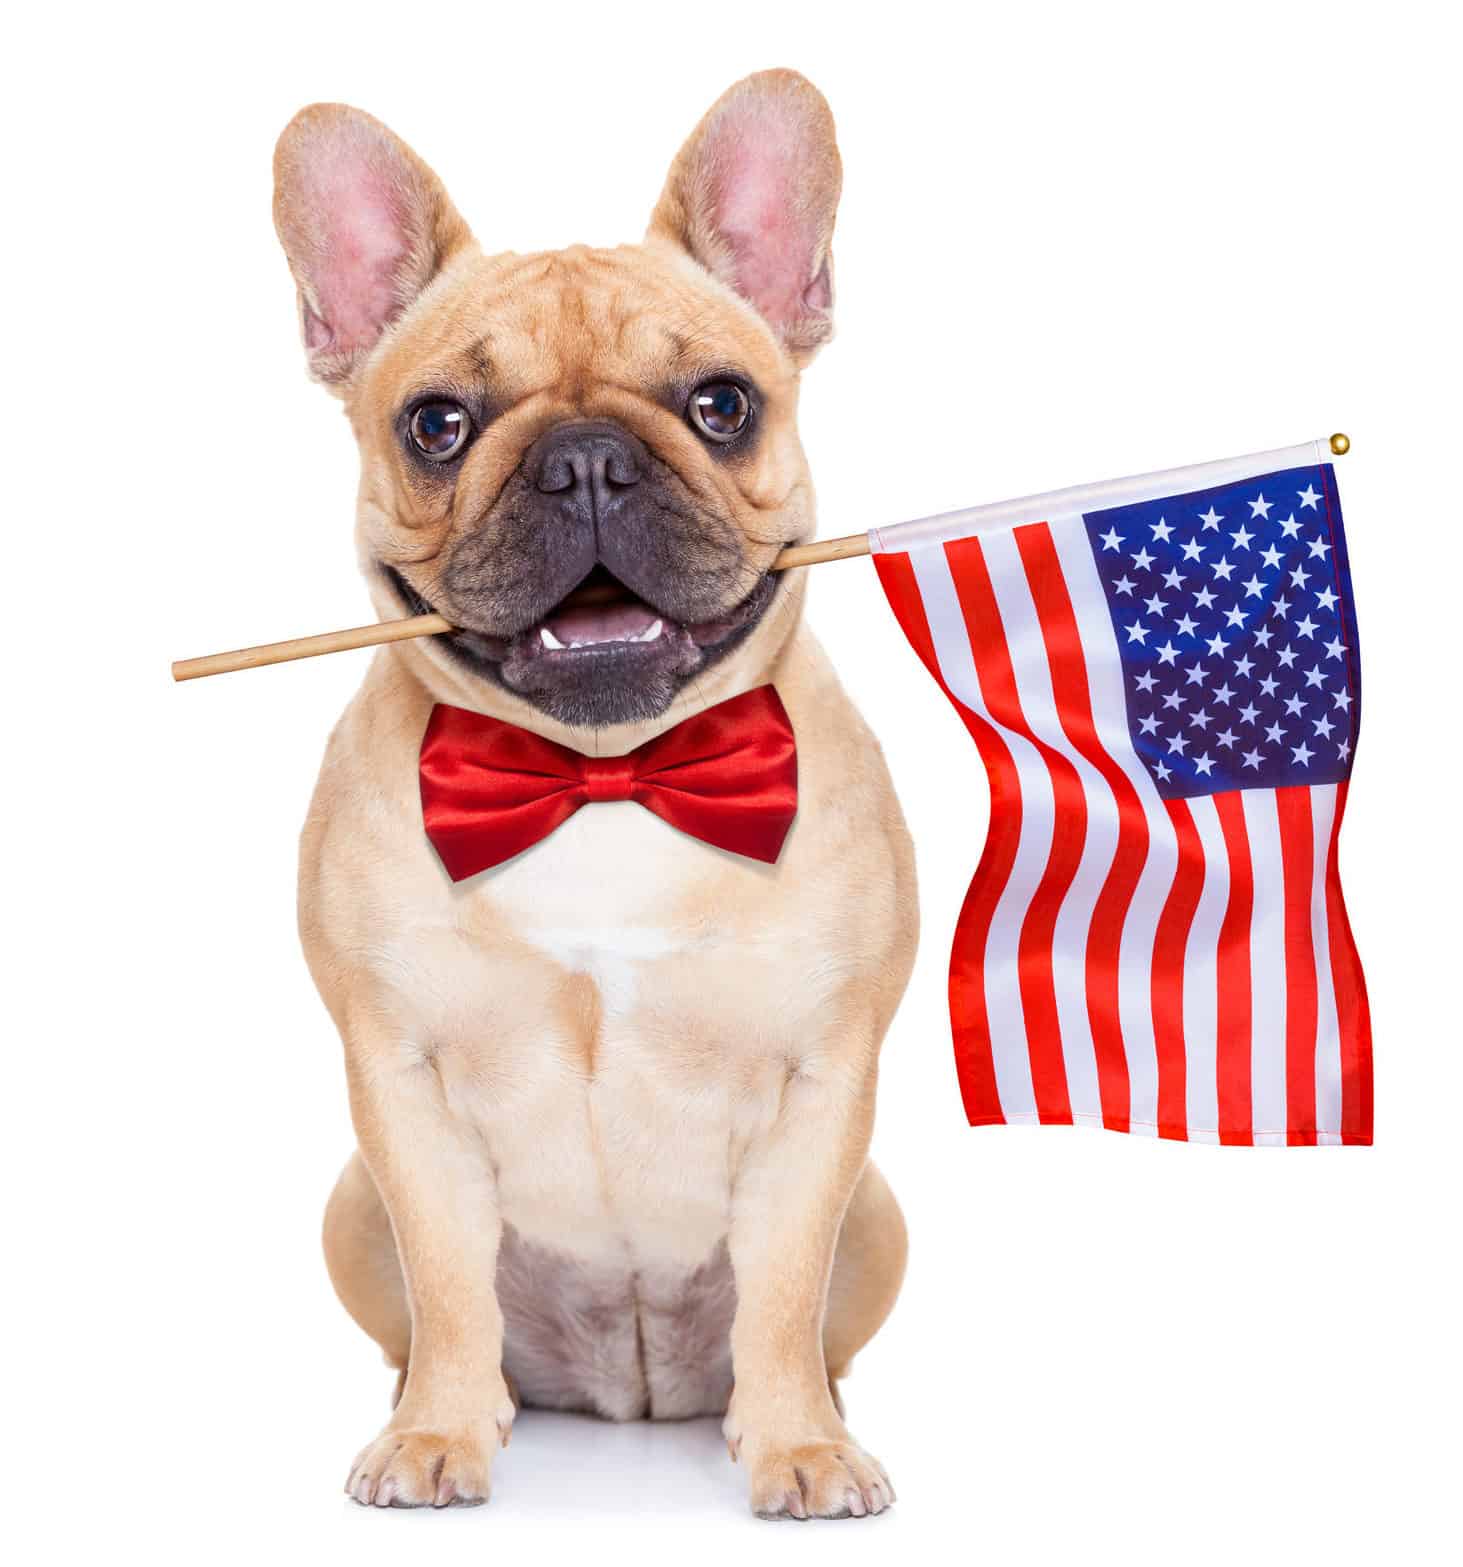 French bulldog holding U.S. flag with mouth